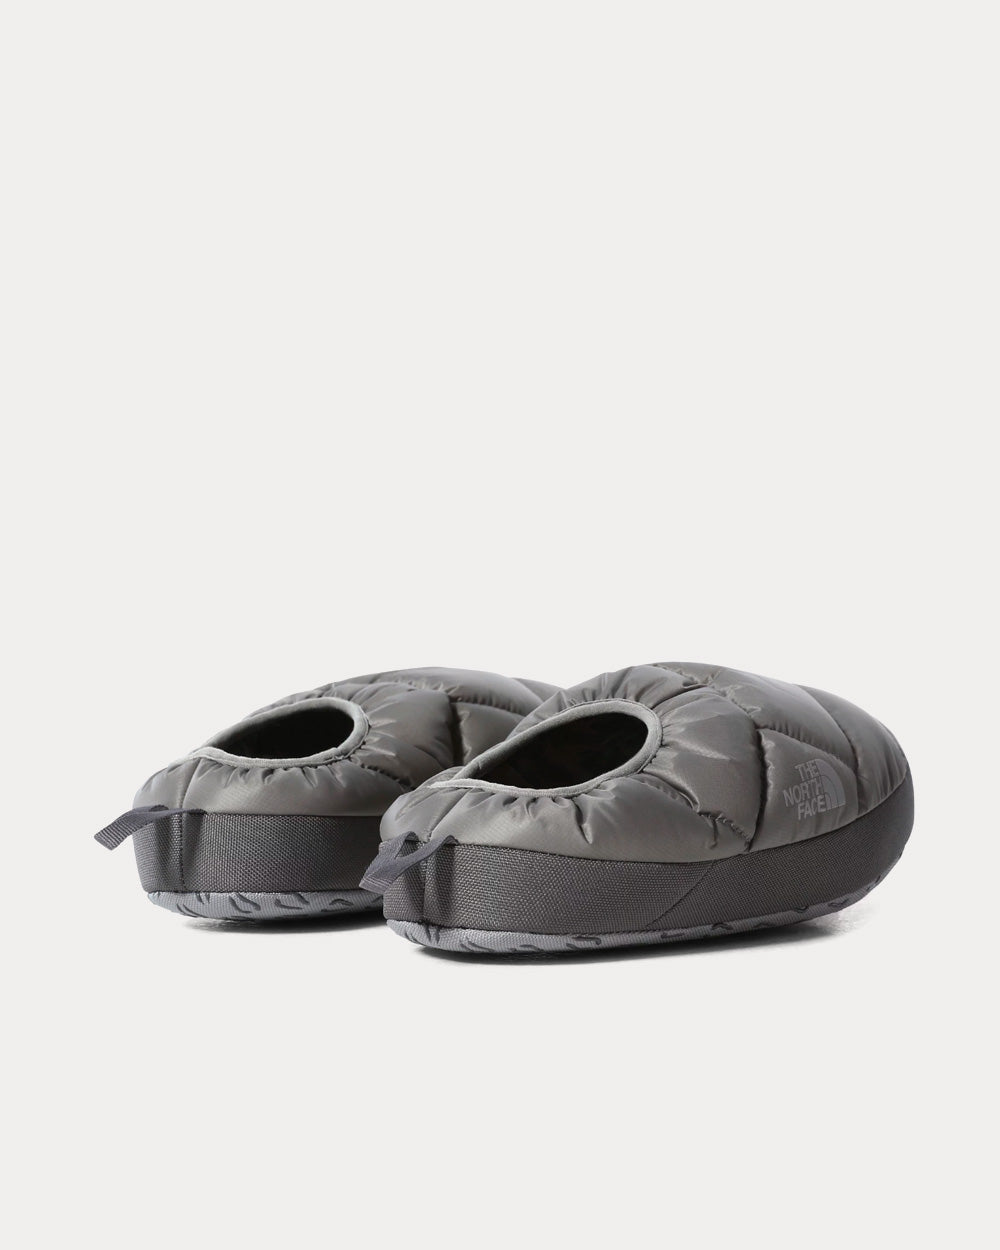 The North Face - NSE III Tent Mules Grey Slip Ons